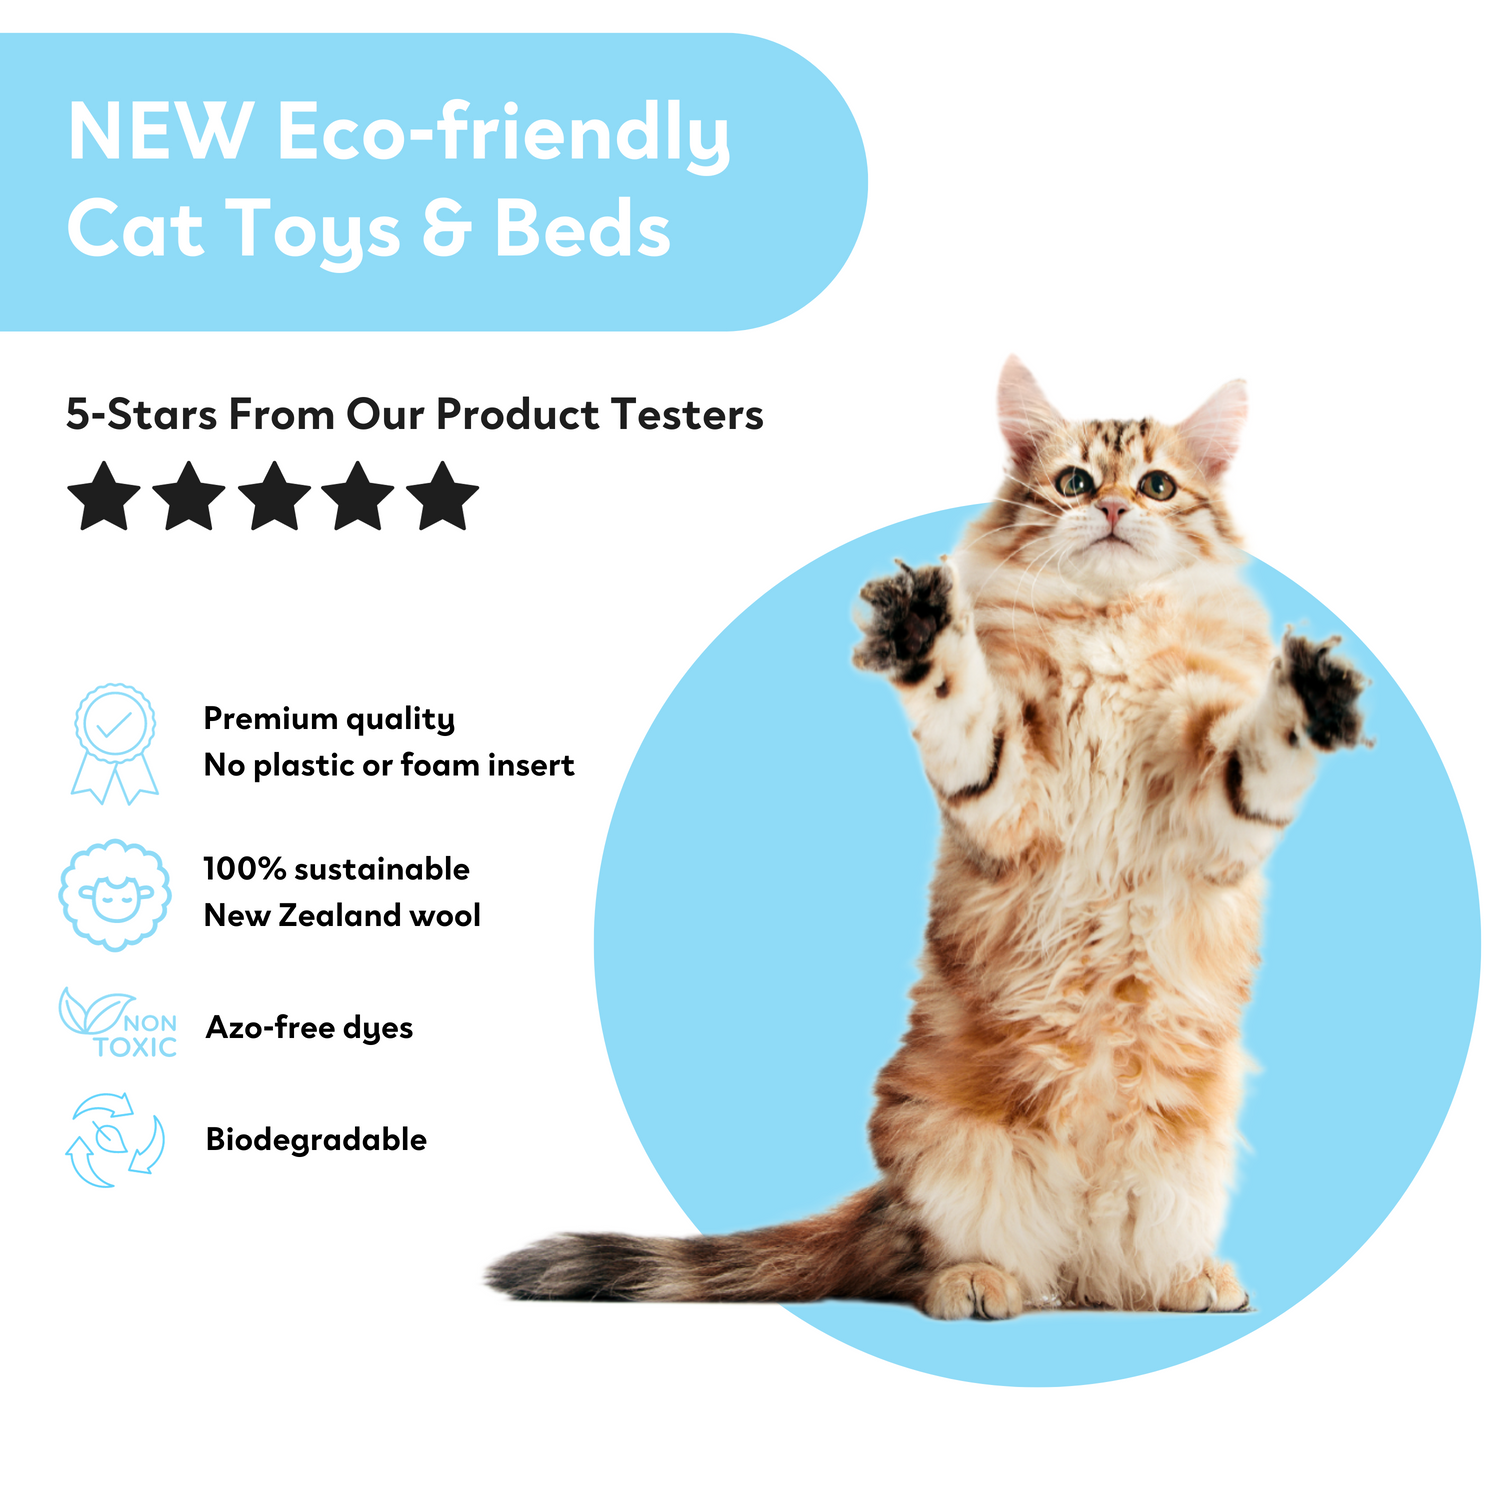 Eco-friendly Cat Toys and Cat Beds, Wool, Biodegradable, Sustainable - Cat giving 5 star review